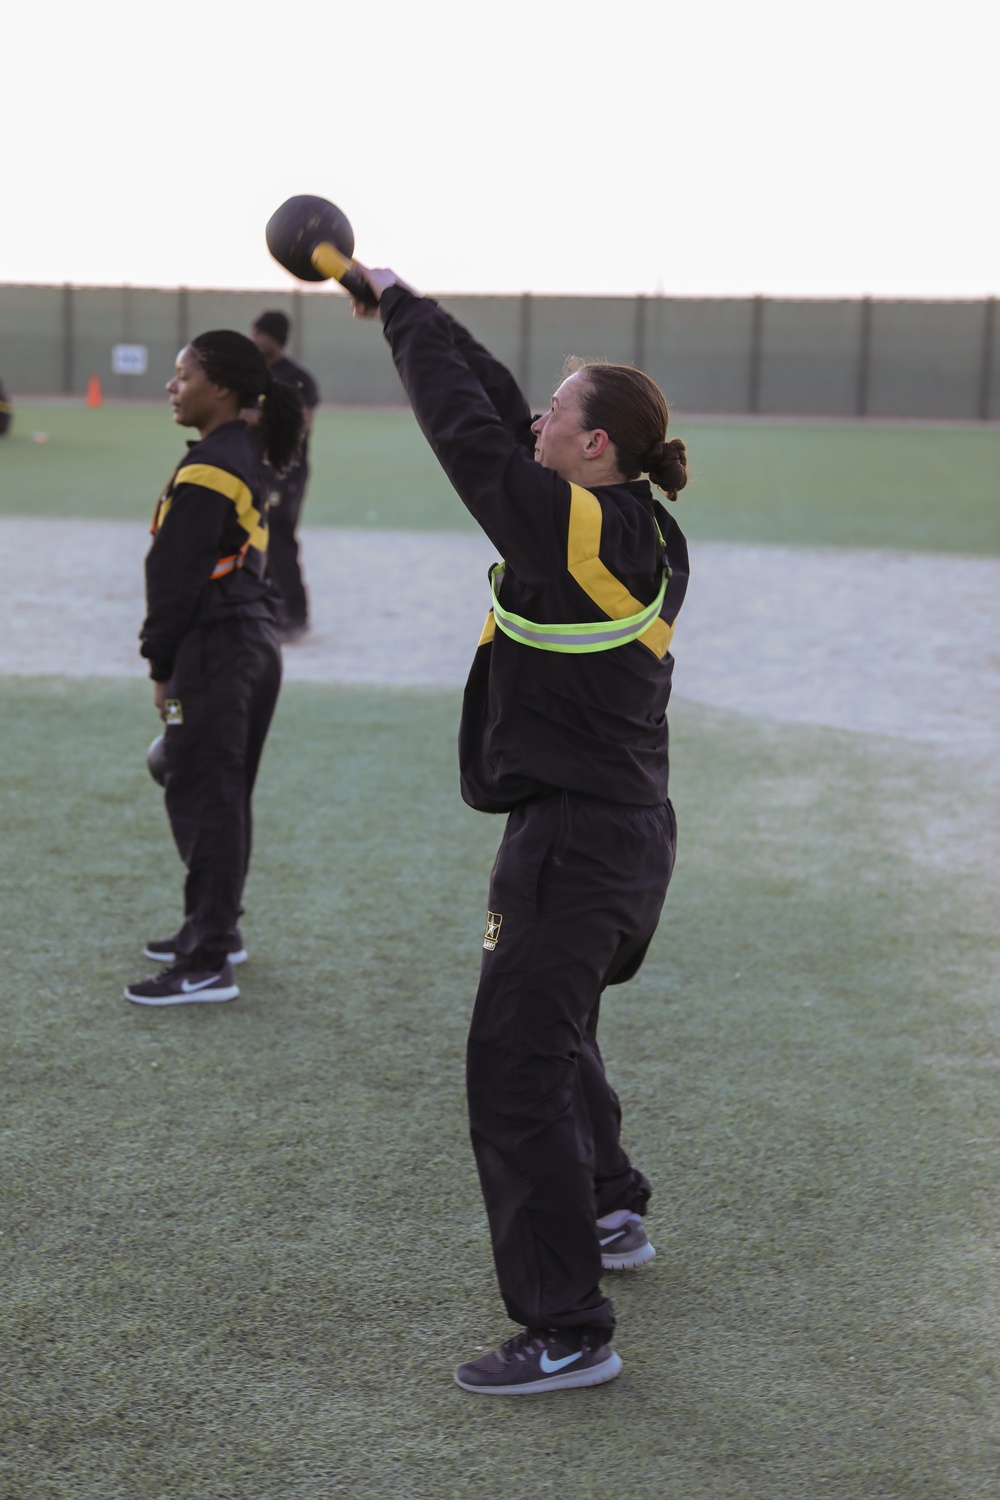 USARCENT Soldiers participate in a physical readiness training (PRT) session in honor of Soldiers